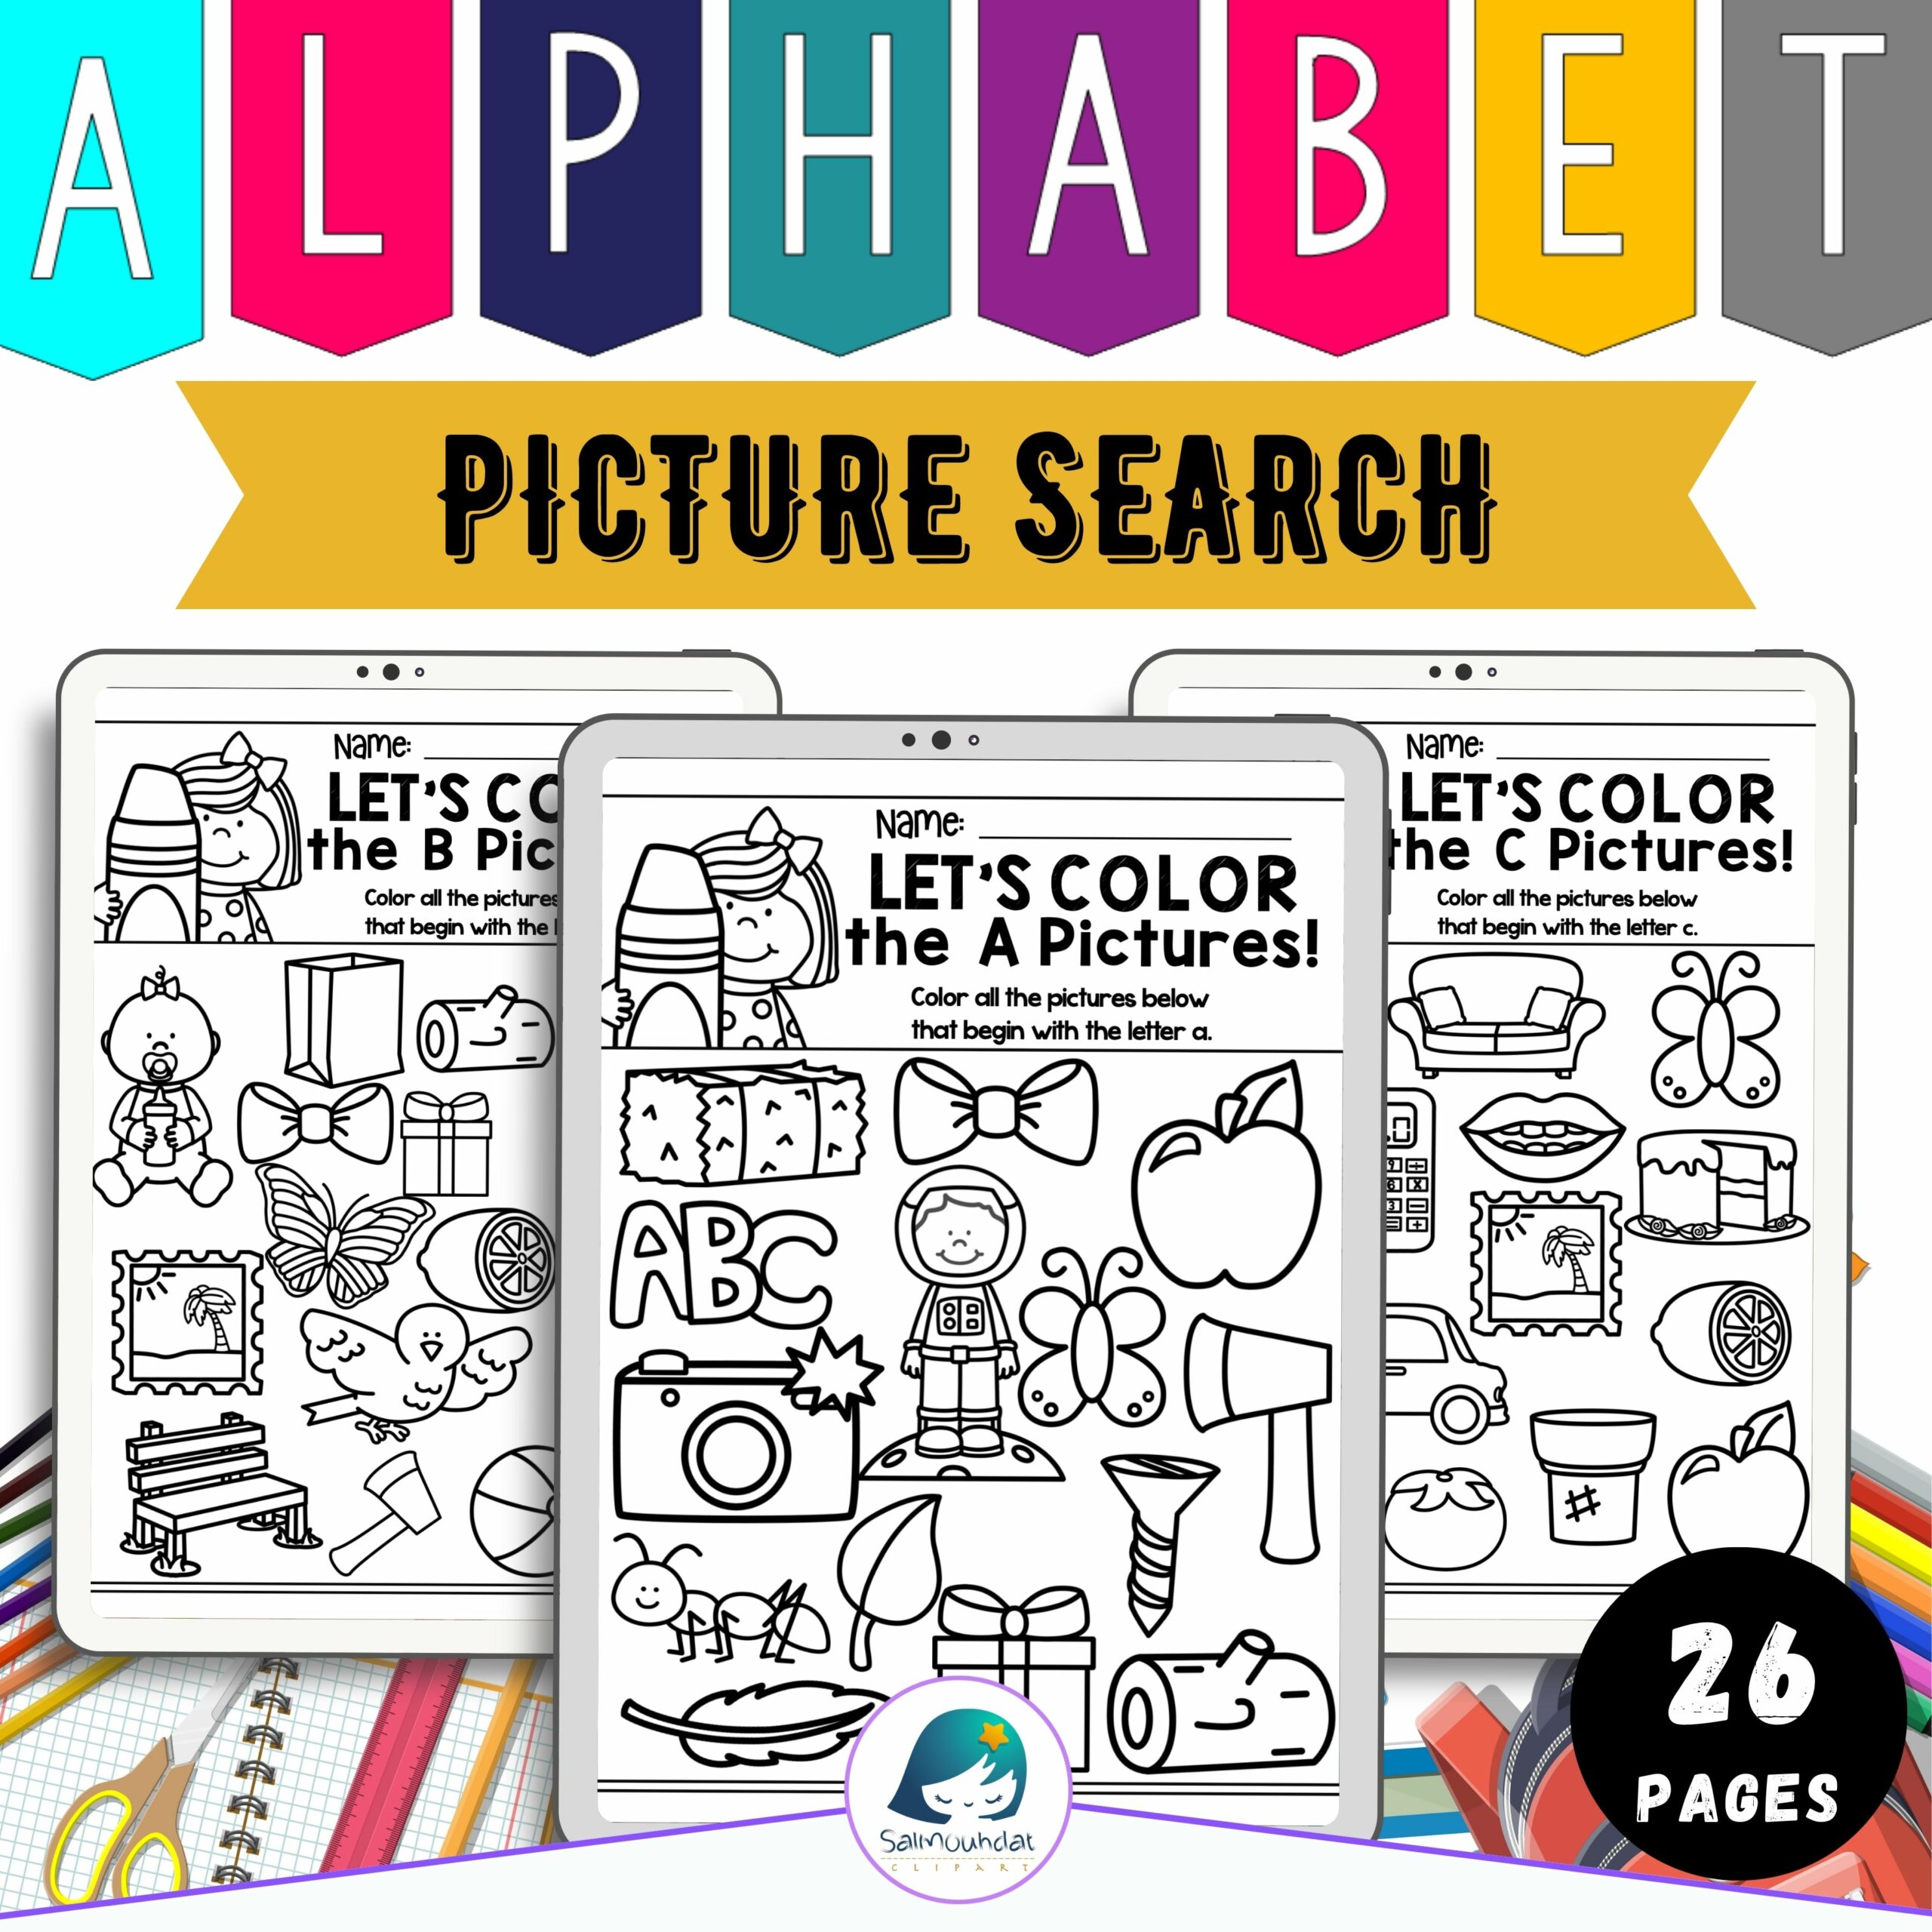 Alphabet picture search back to school activity book for first day of school made by teachers